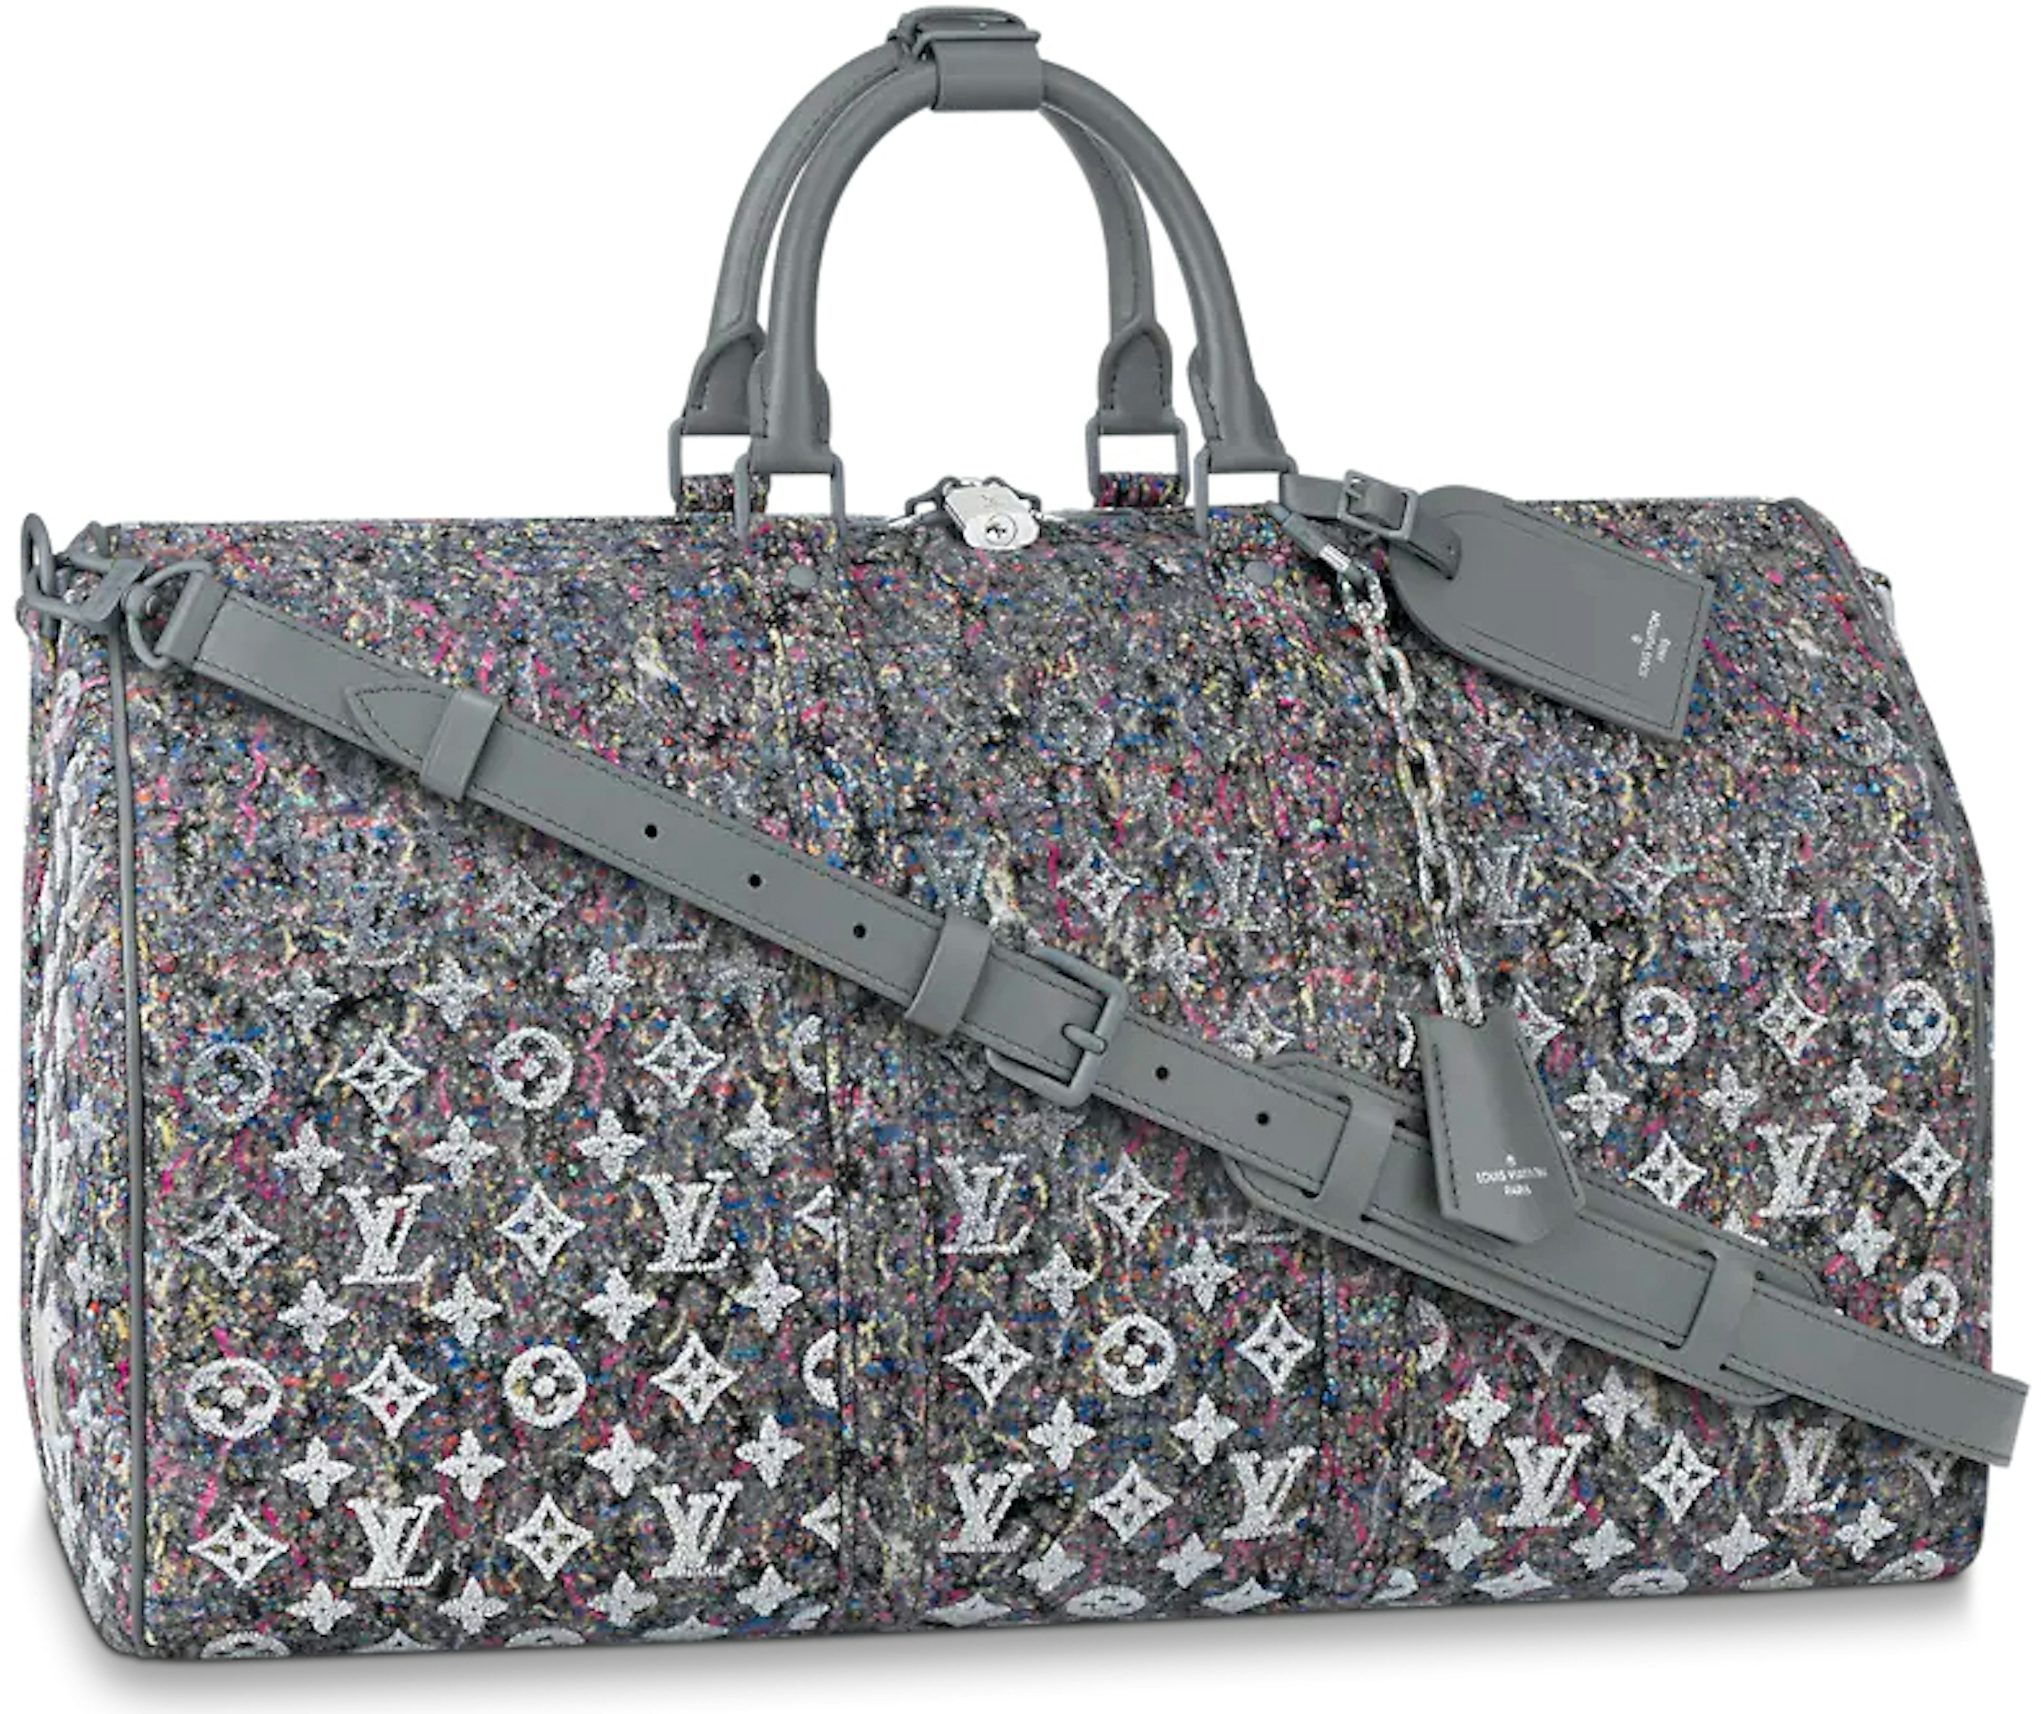 Louis Vuitton's Felt Bag Collection Is Made From Recycled Materials